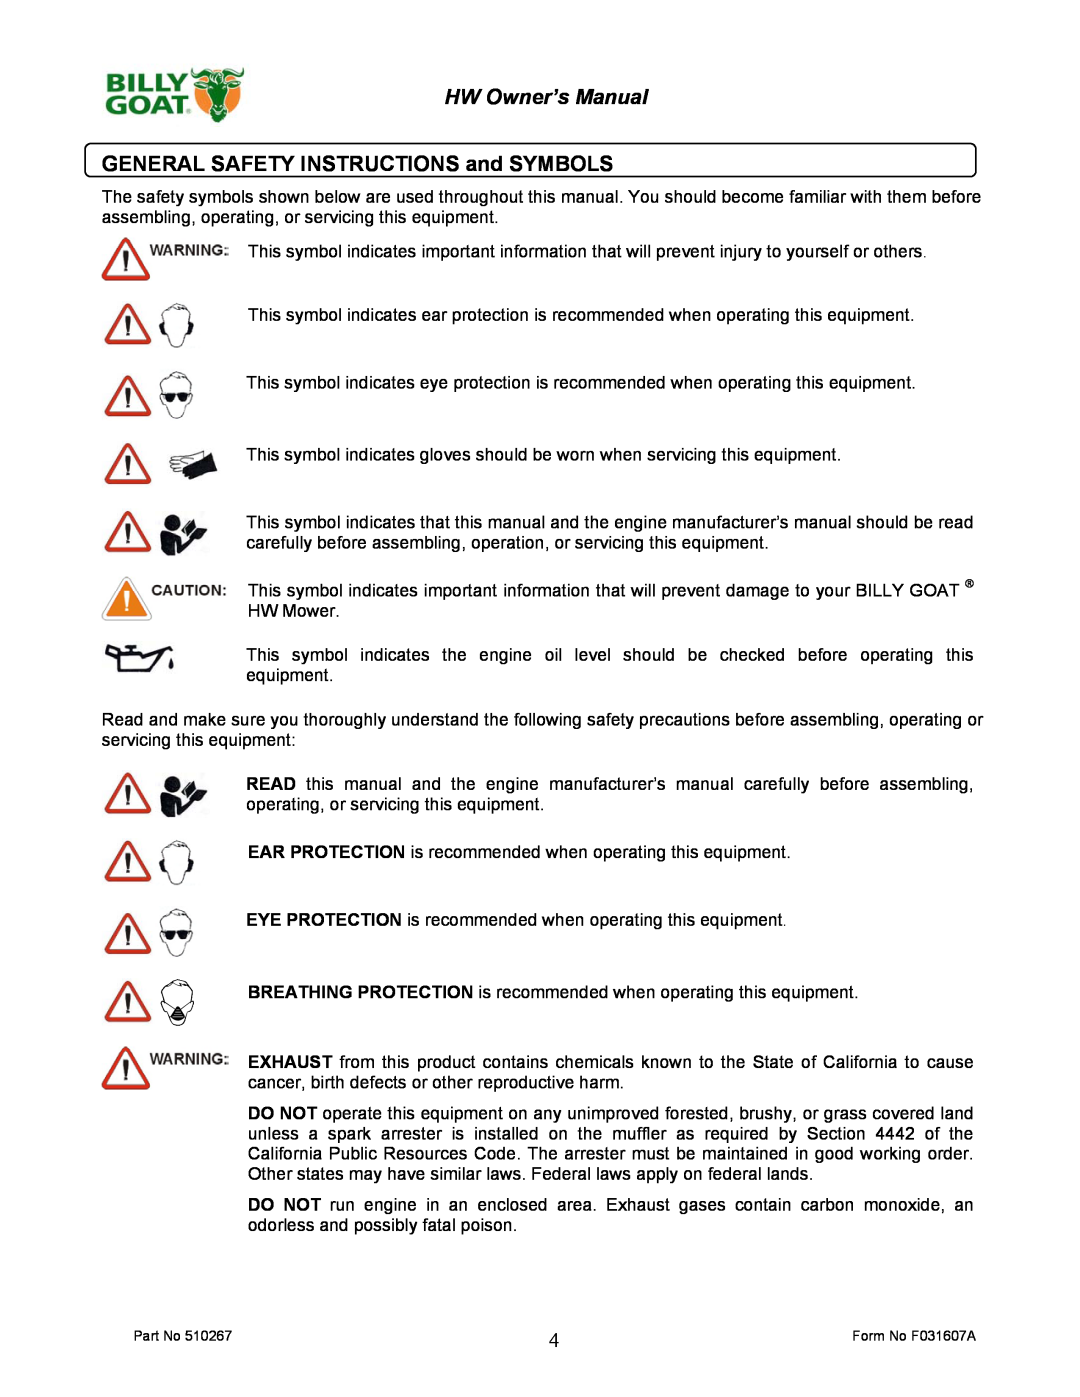 Billy Goat HW651SP owner manual GENERAL SAFETY INSTRUCTIONS and SYMBOLS 